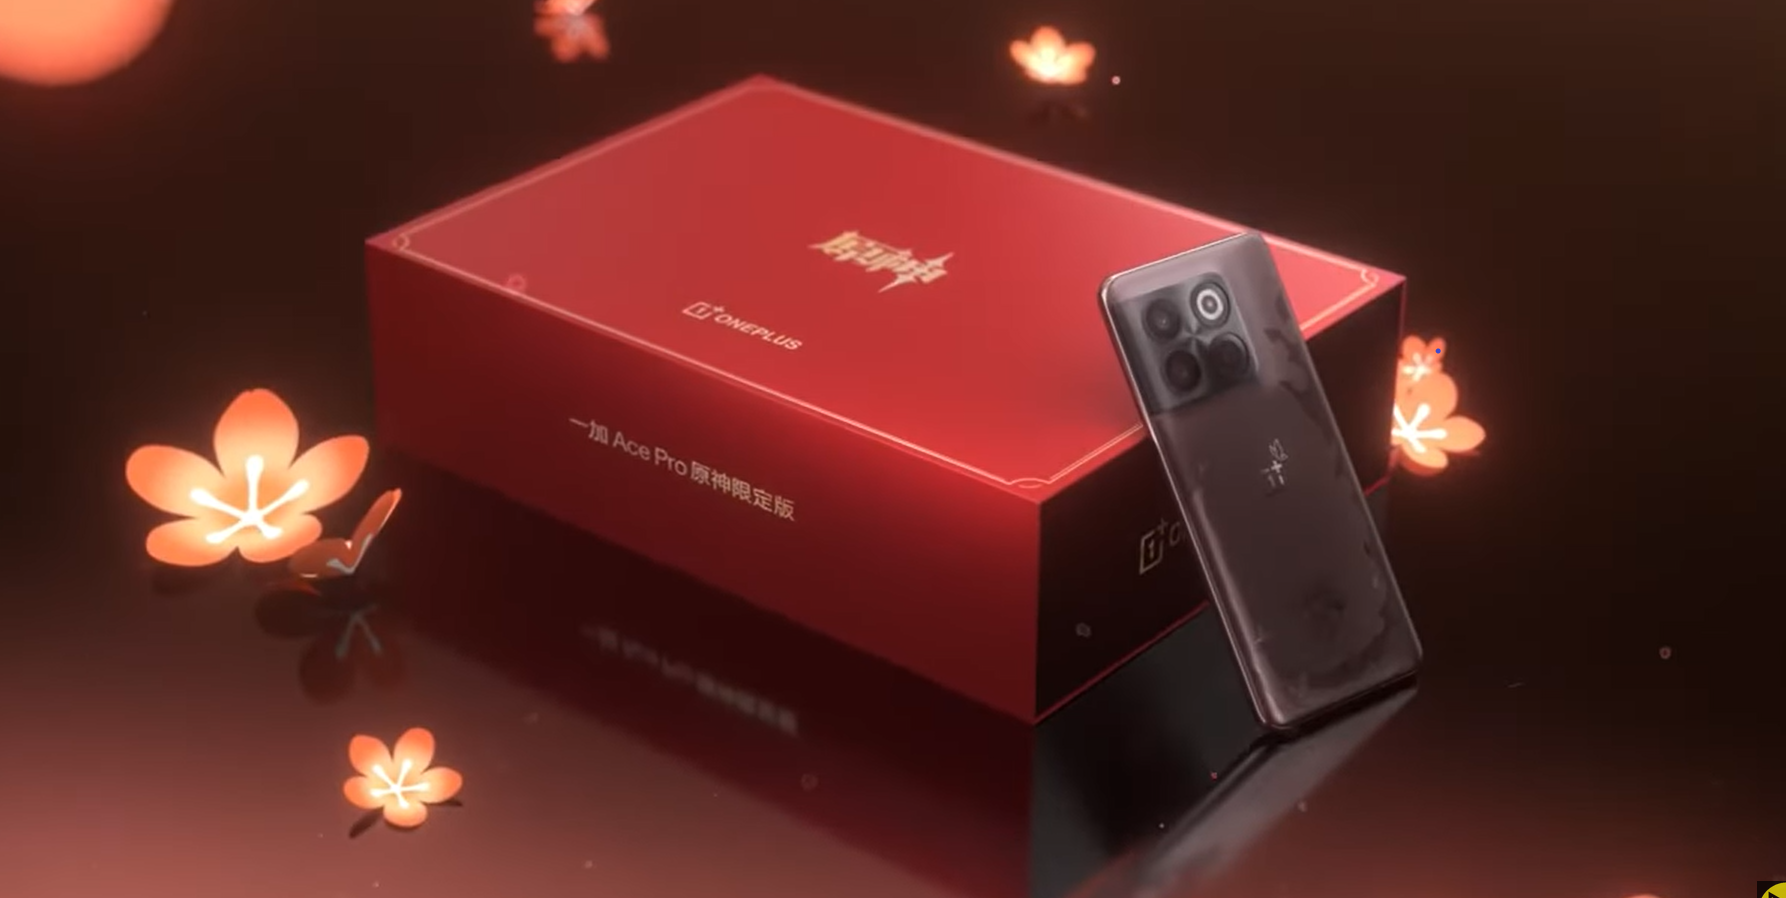 OnePlus Ace Pro Genshin Impact Limited Edition is announced in